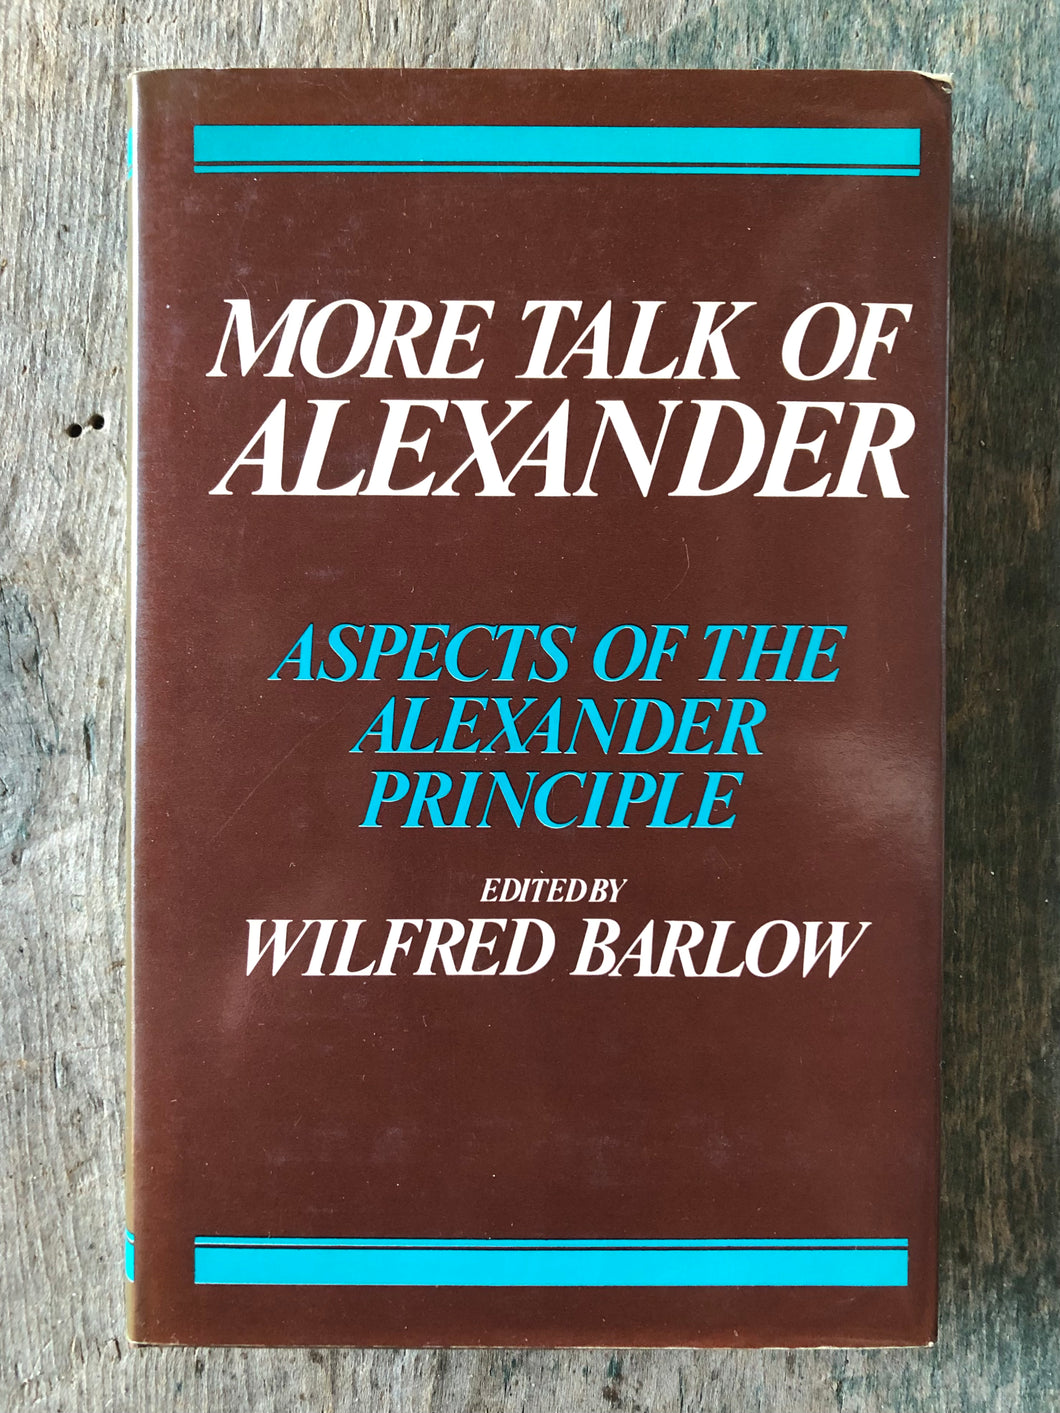 More Talk of Alexander edited by Dr. Wilfred Barlow